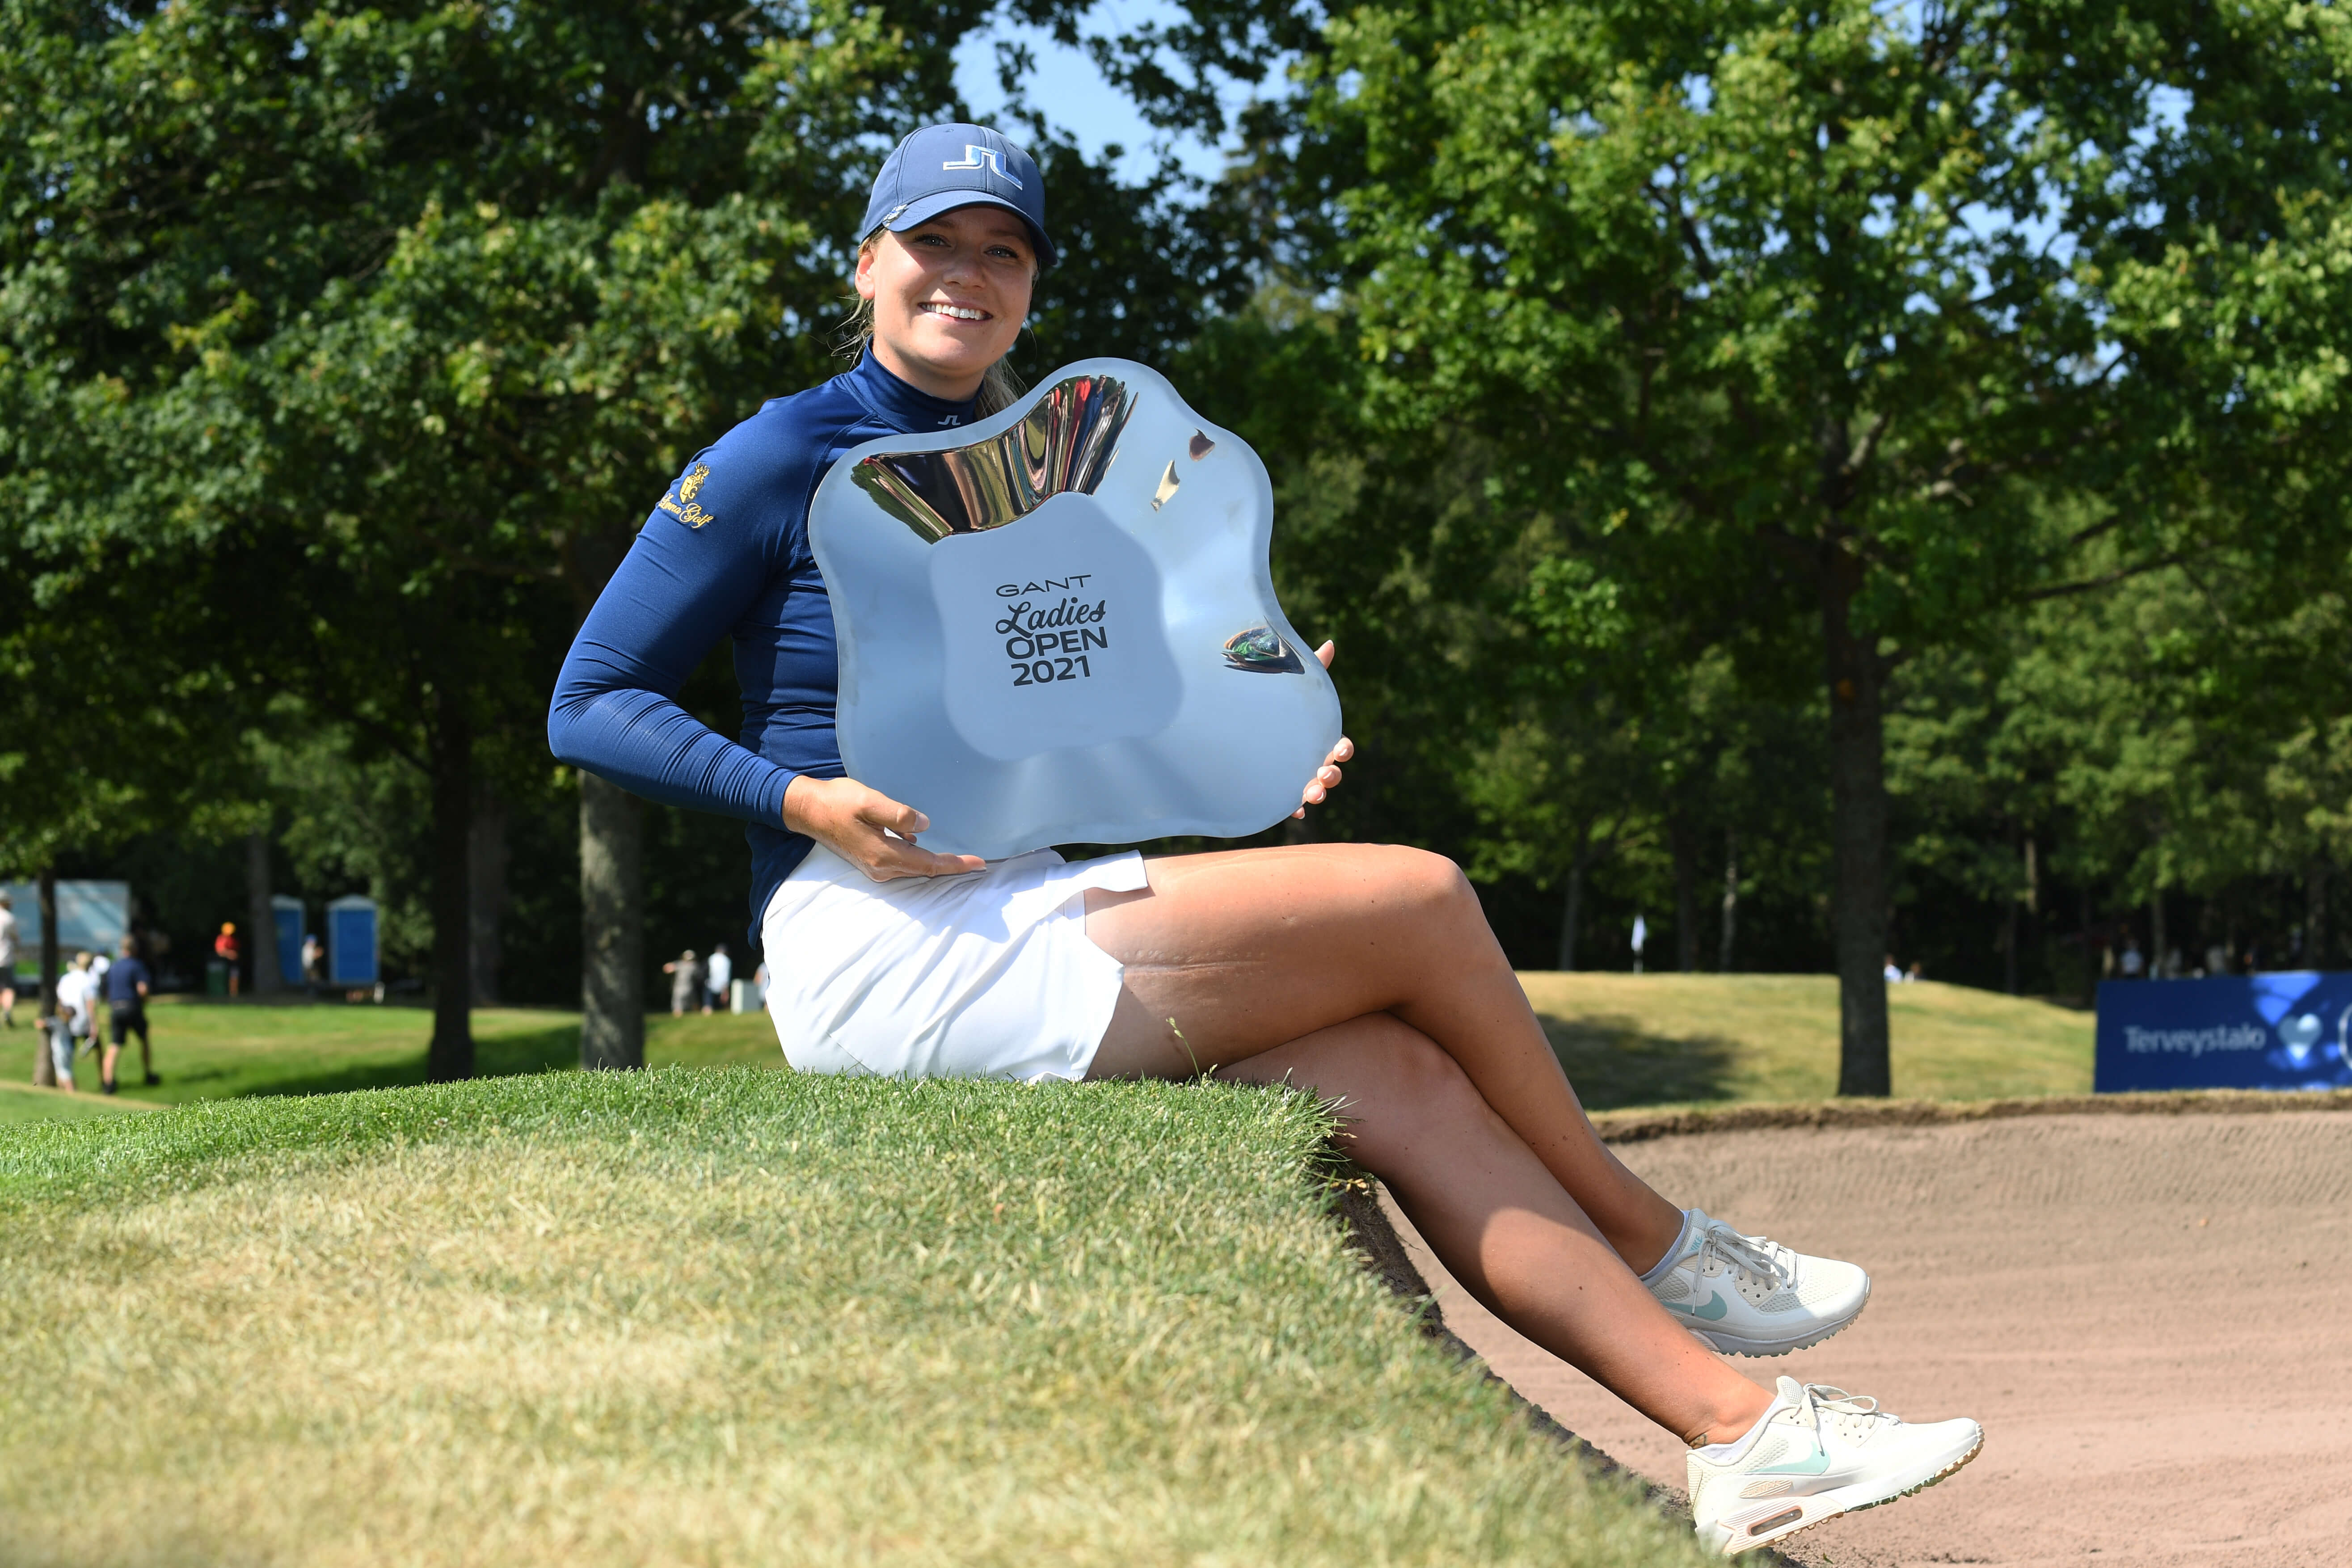 Madeleine Castrén, a Finnish female golfer, who has a remarkable story that deserves recognition. She has excelled both on the Ladies European Tour (LET) and the LPGA Tour. 